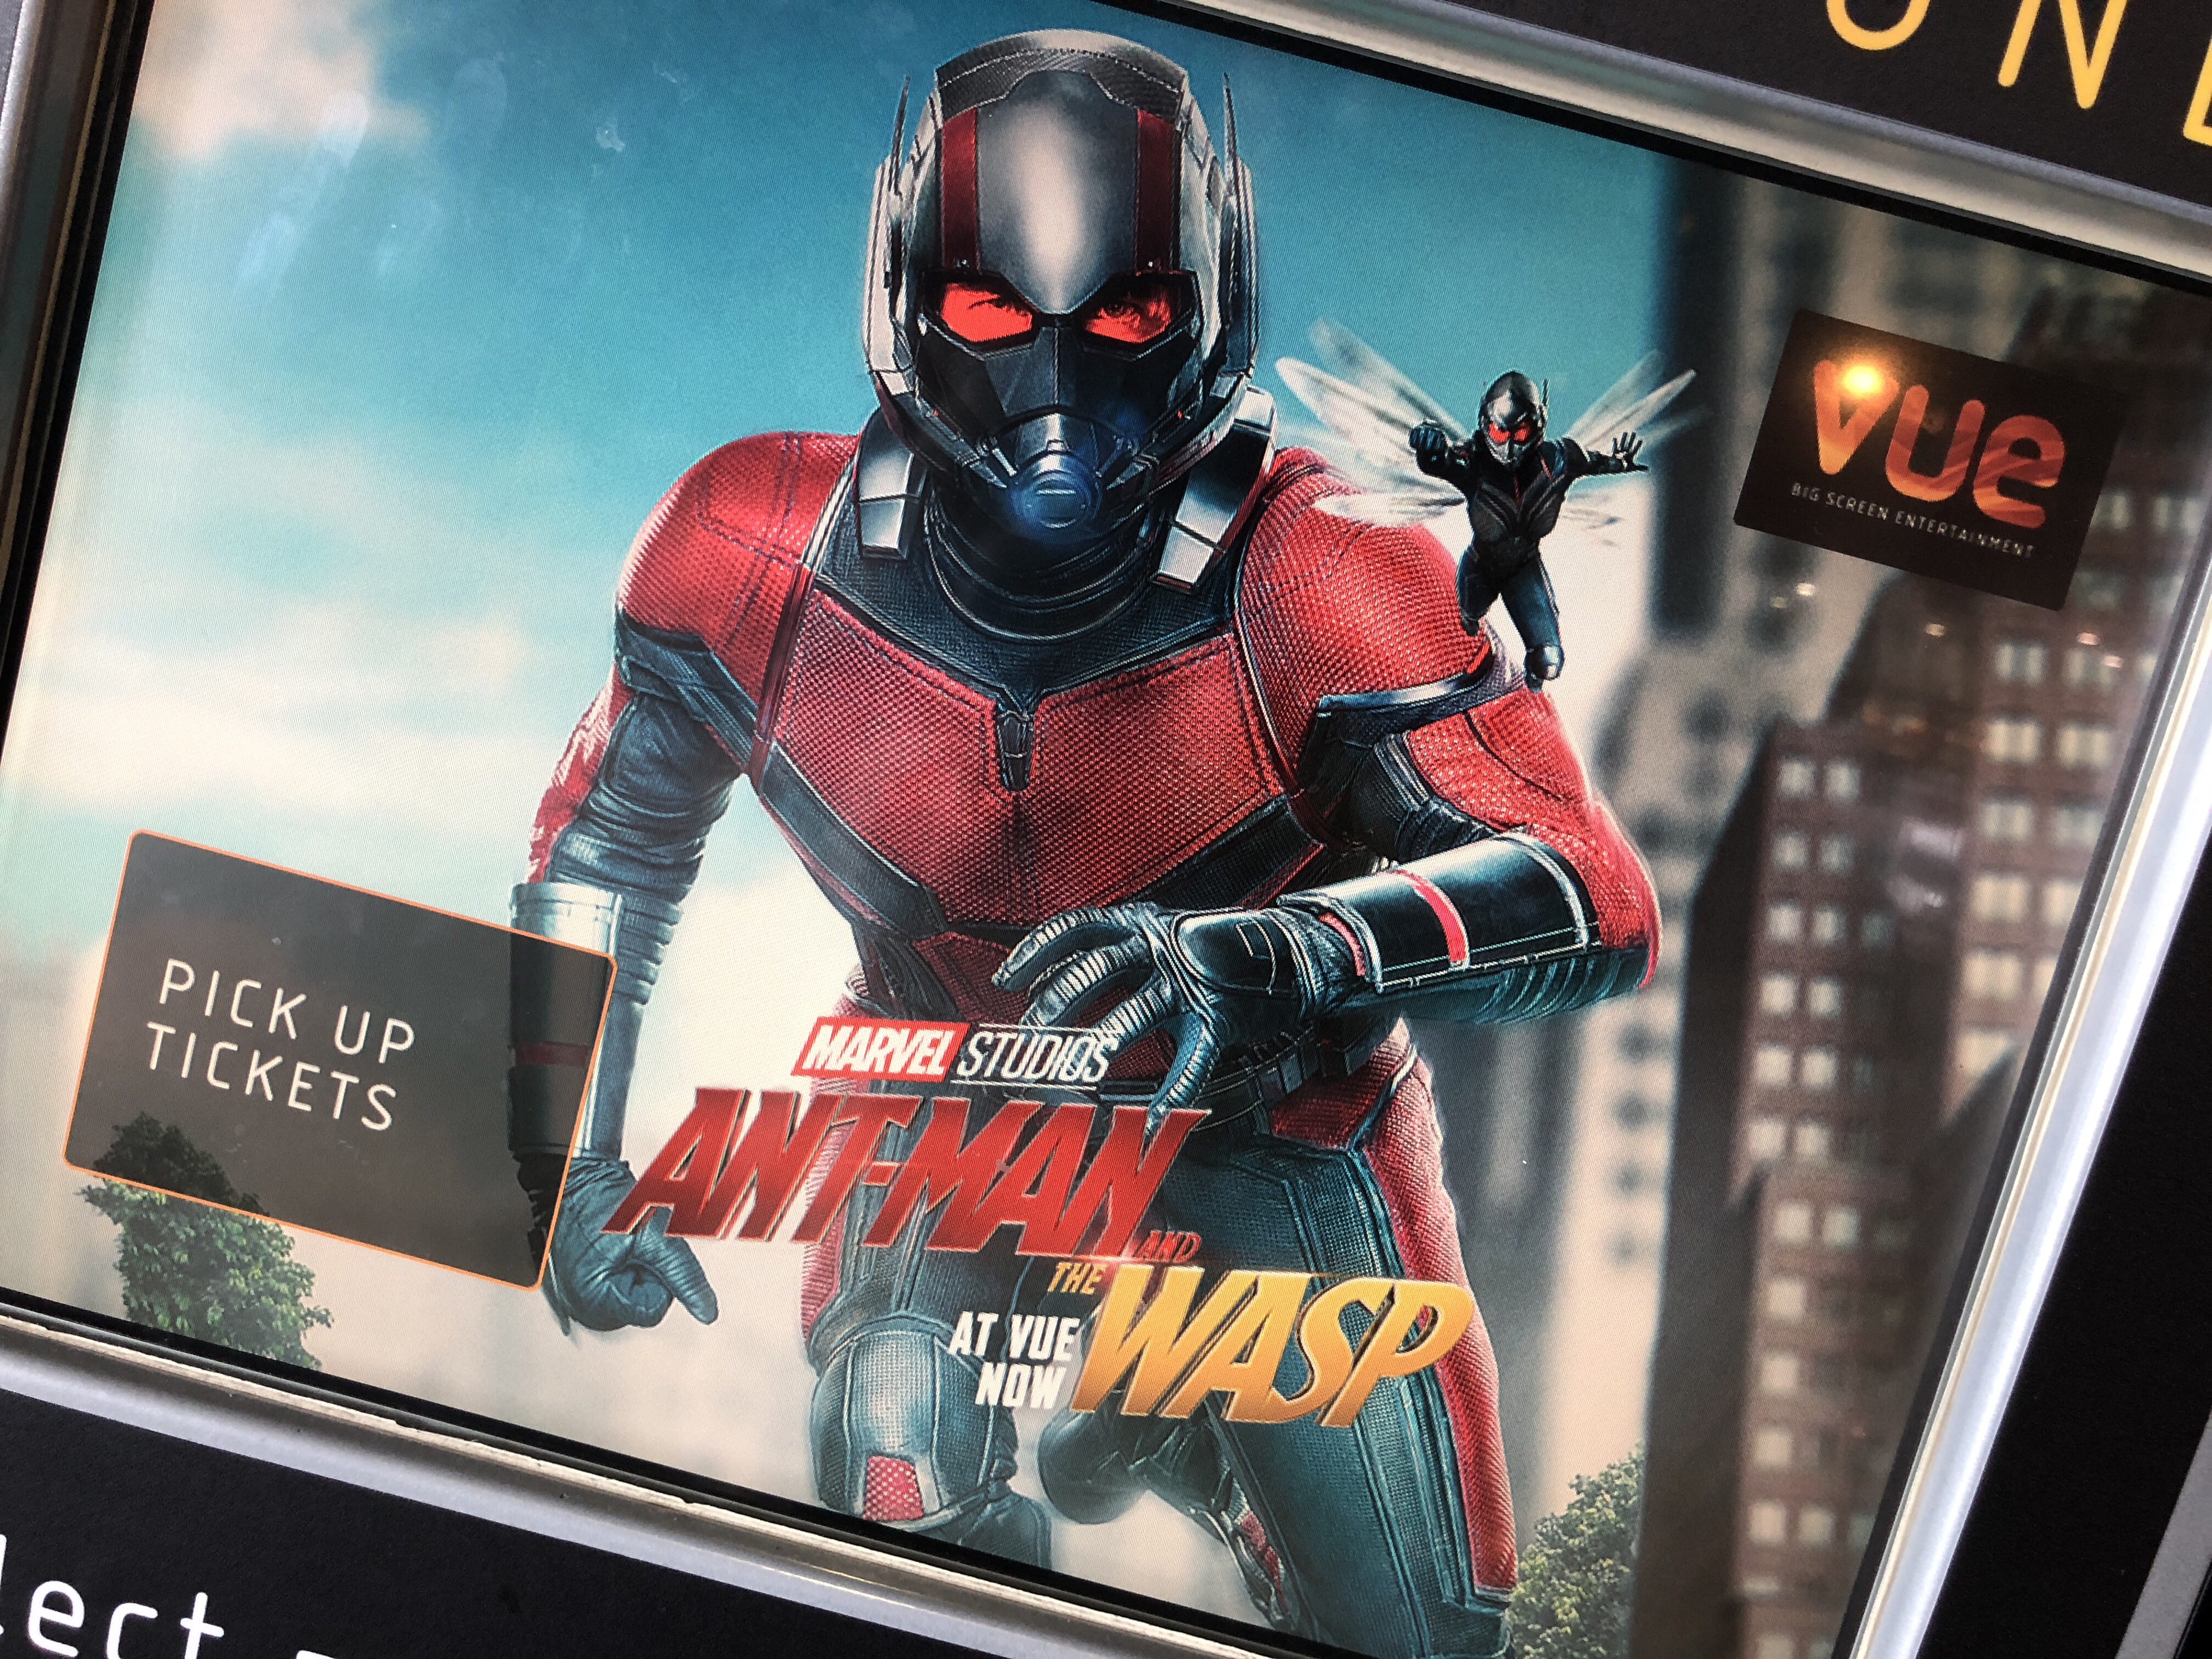 Ant-man and The Wasp